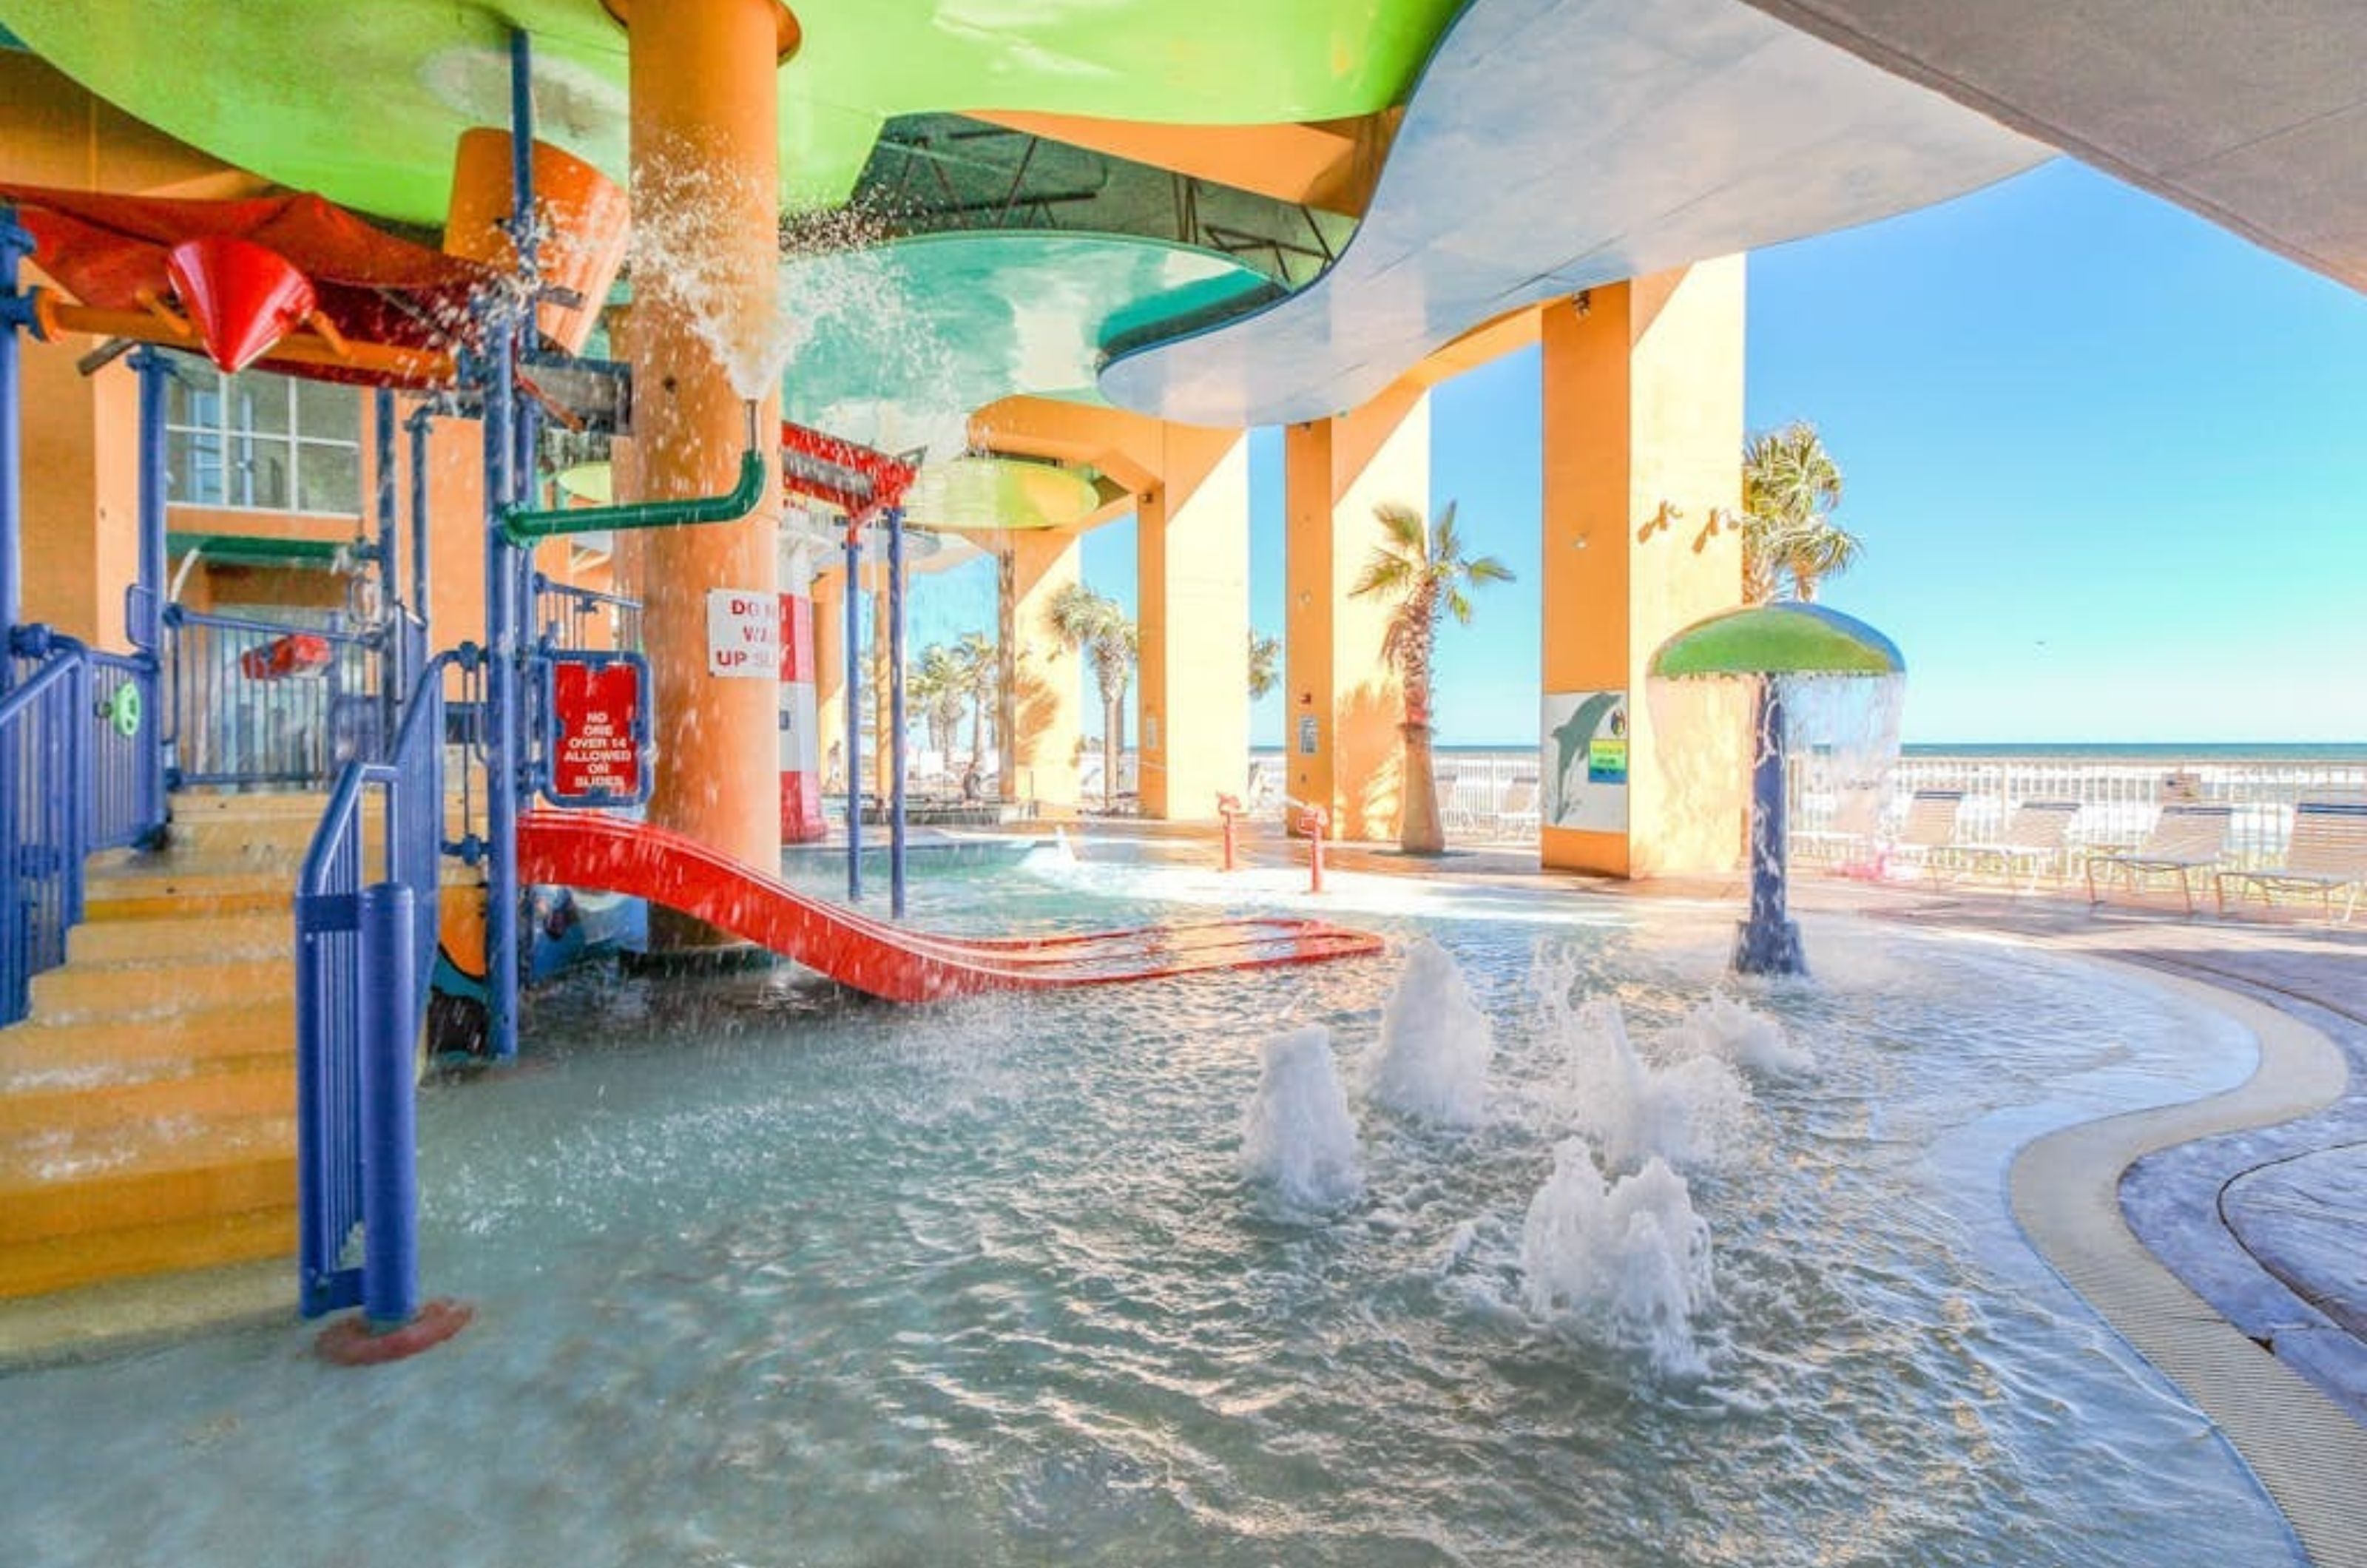 One of the two waterparks at Splash Resort with fountains and a waterslide	